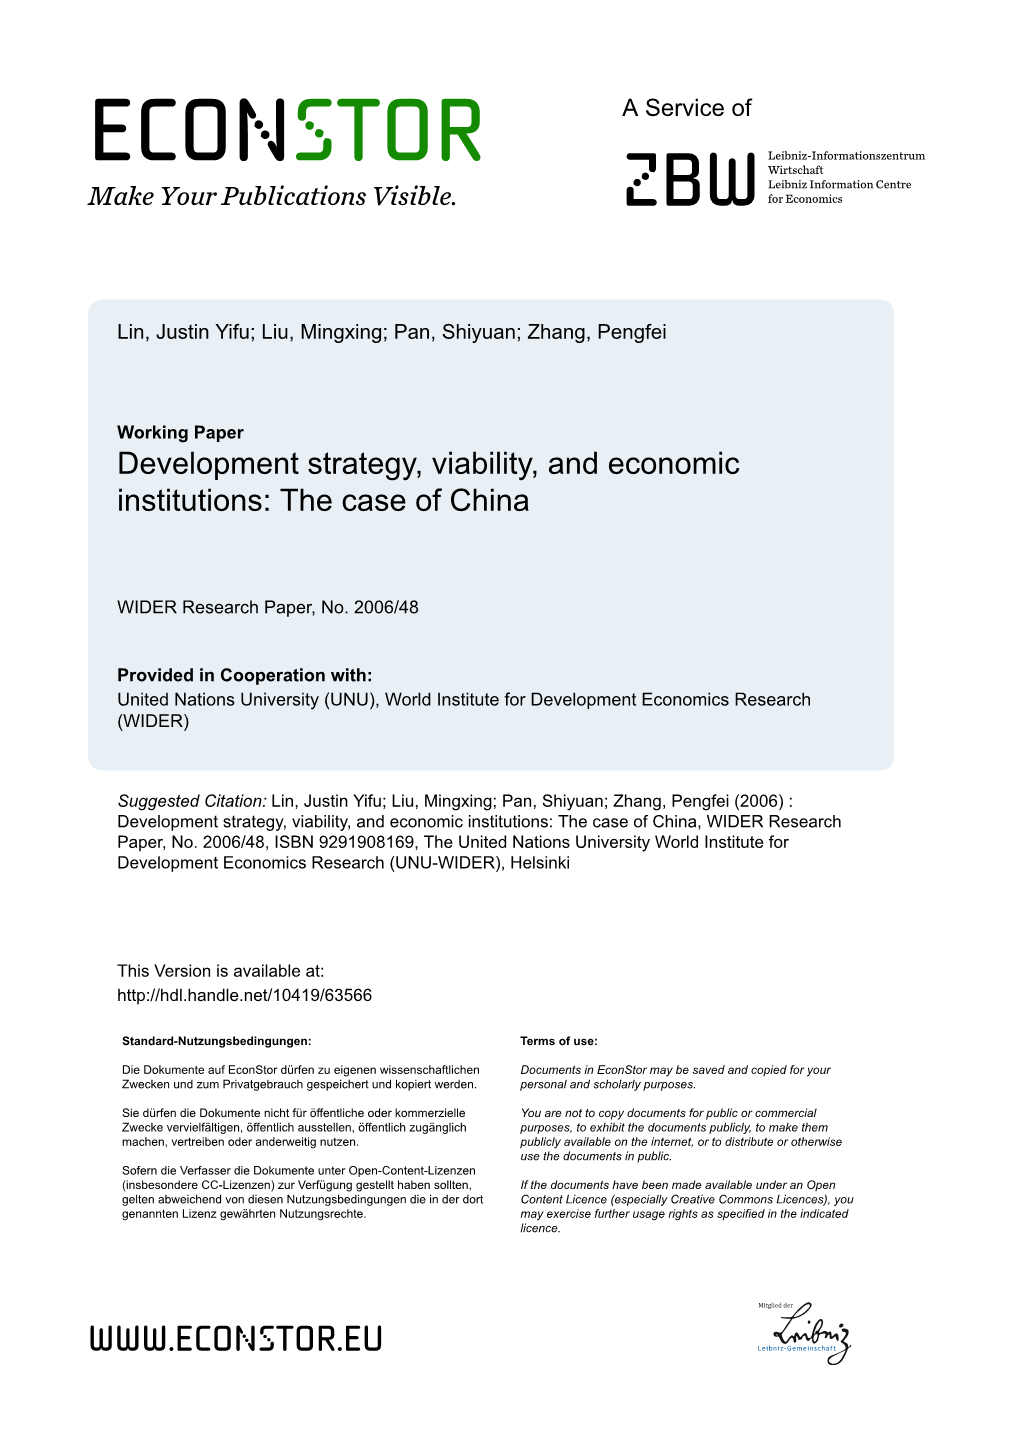 WIDER Research Paper 2006-48 Development Strategy